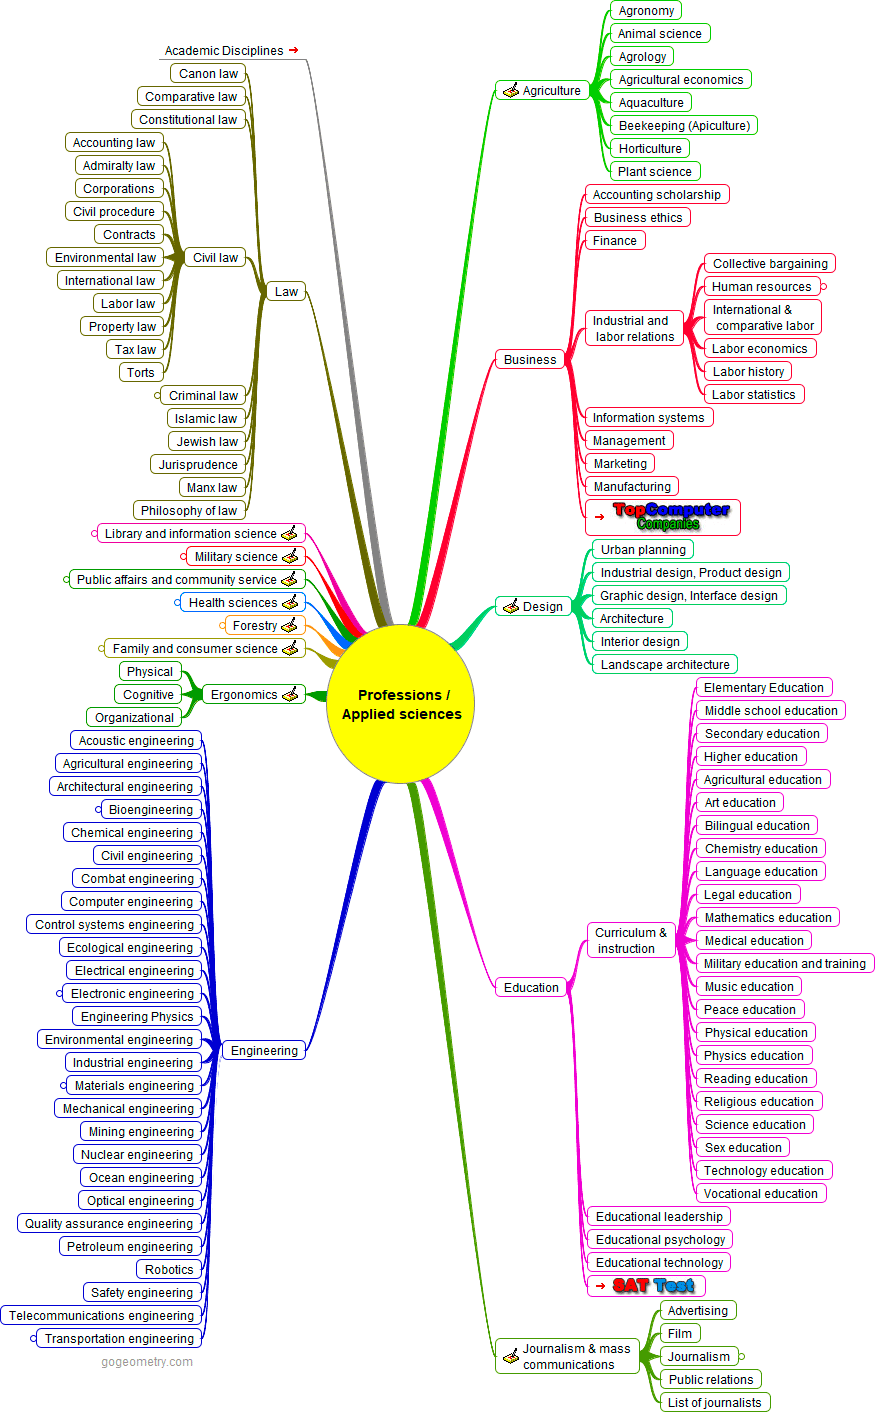 Academic Disciplines Professions, Applied Sciences and Arts Interactive Mind Map, No Flash support